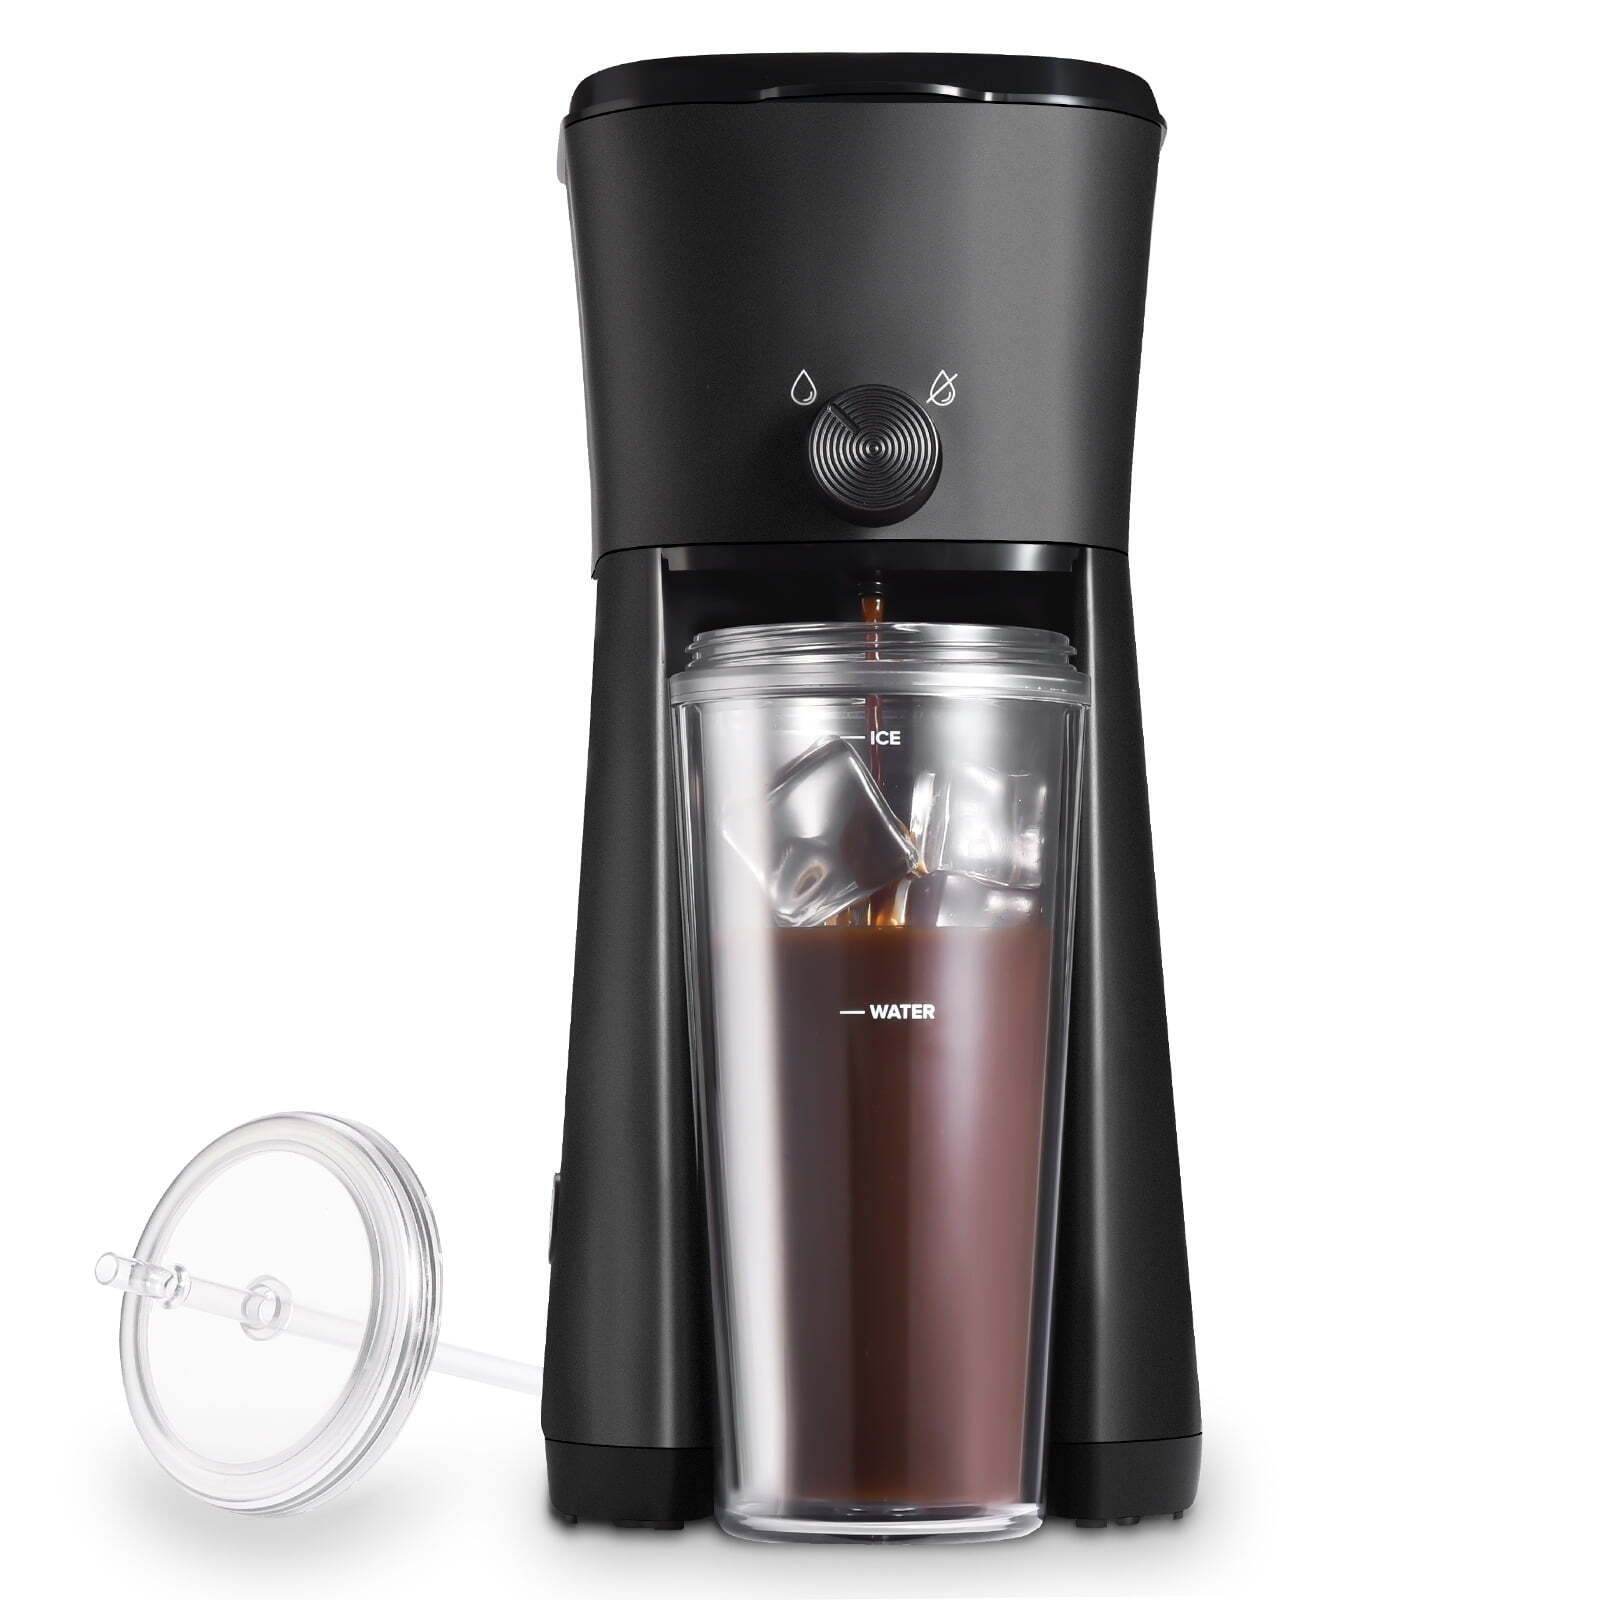 Countertop Iced Coffee Maker with 20 Fl Oz Reusable Tumbler and Filter, Black US